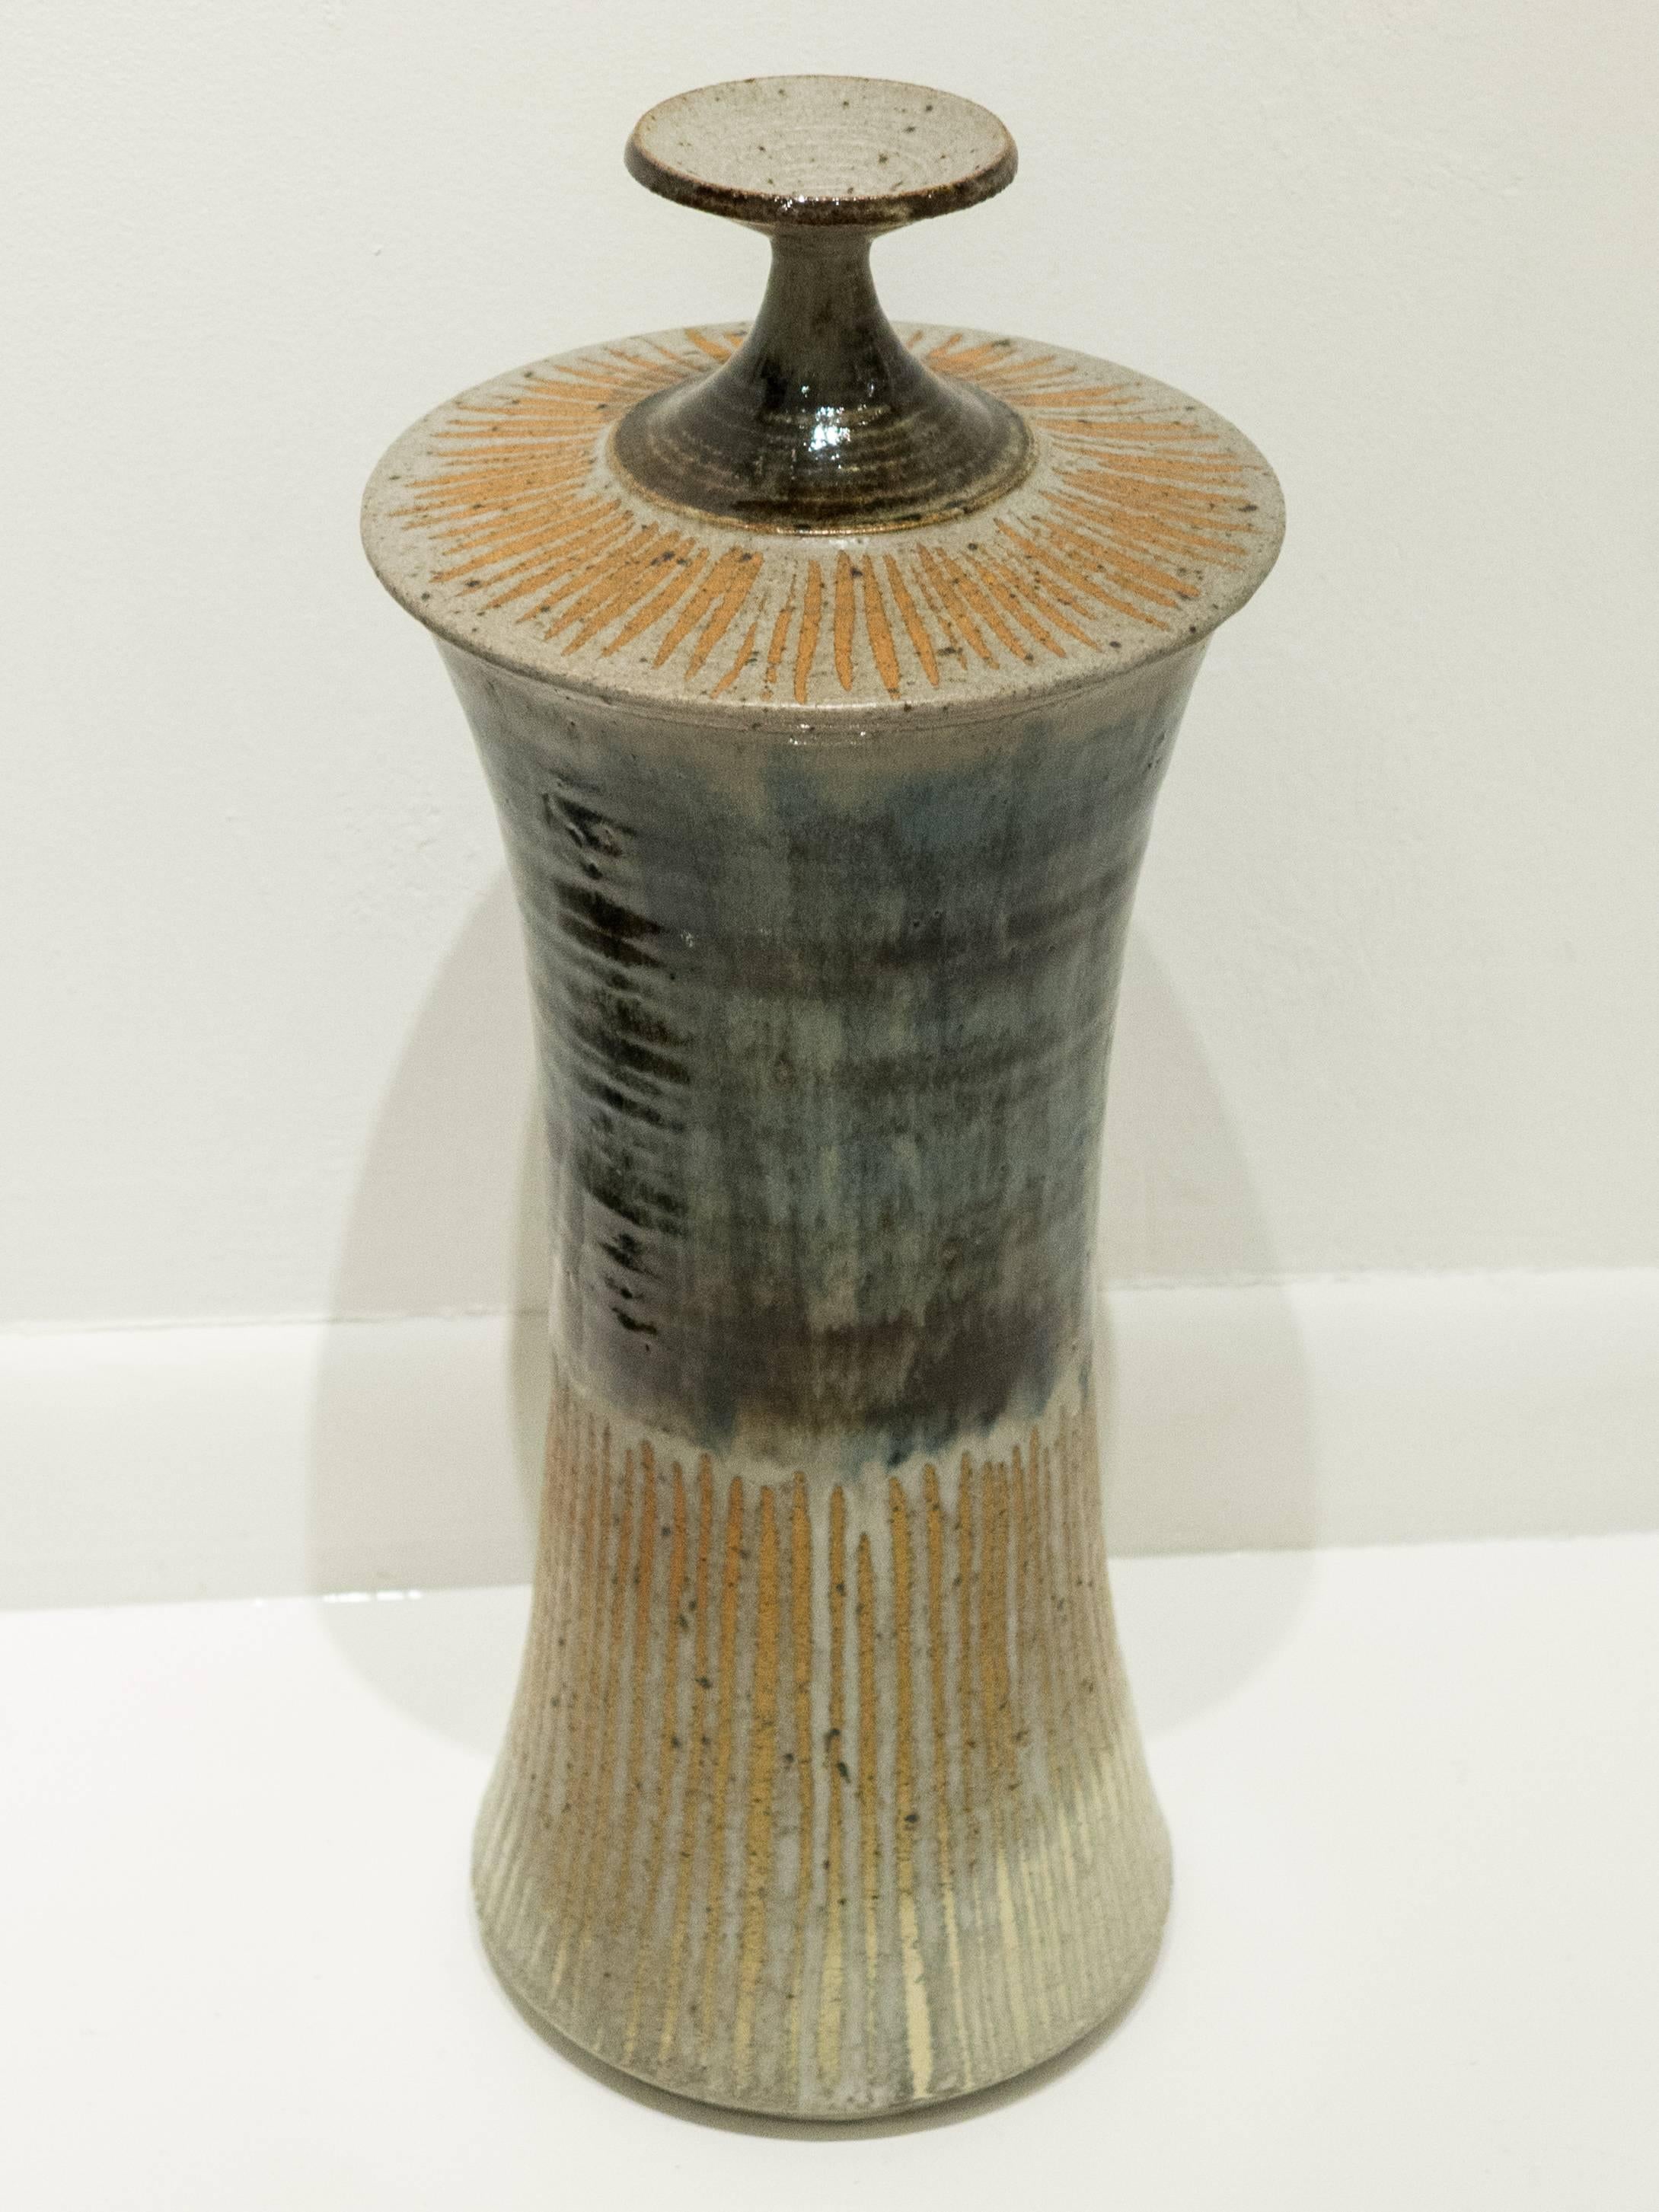 Tall lidded vessel by New Hampshire master potter Gerry Williams, featuring a painterly application of glazed and unglazed elements, and semi-gloss and matte glazes. Executed circa 1970s. Incised signature and cypher.